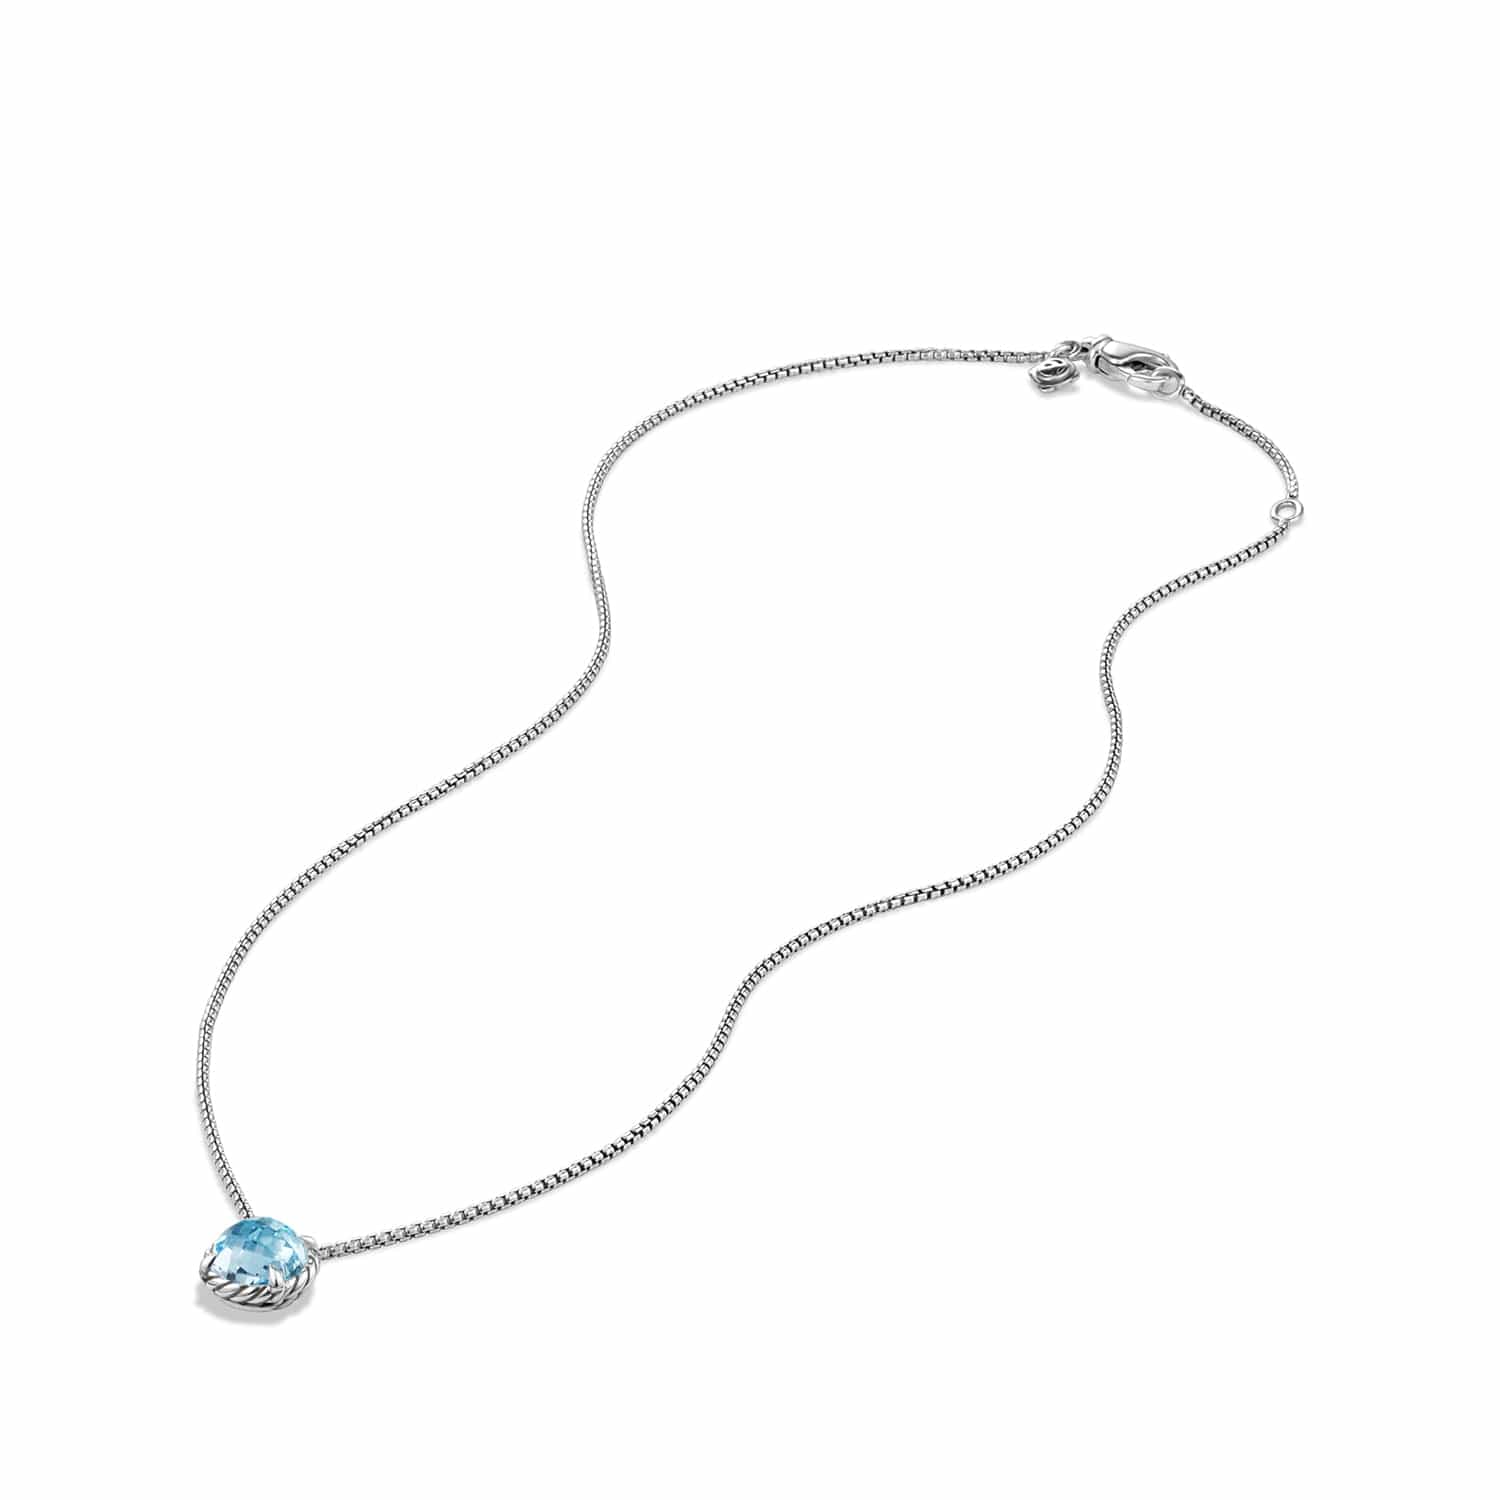 Chatelaine Pendant Necklace with Blue Topaz